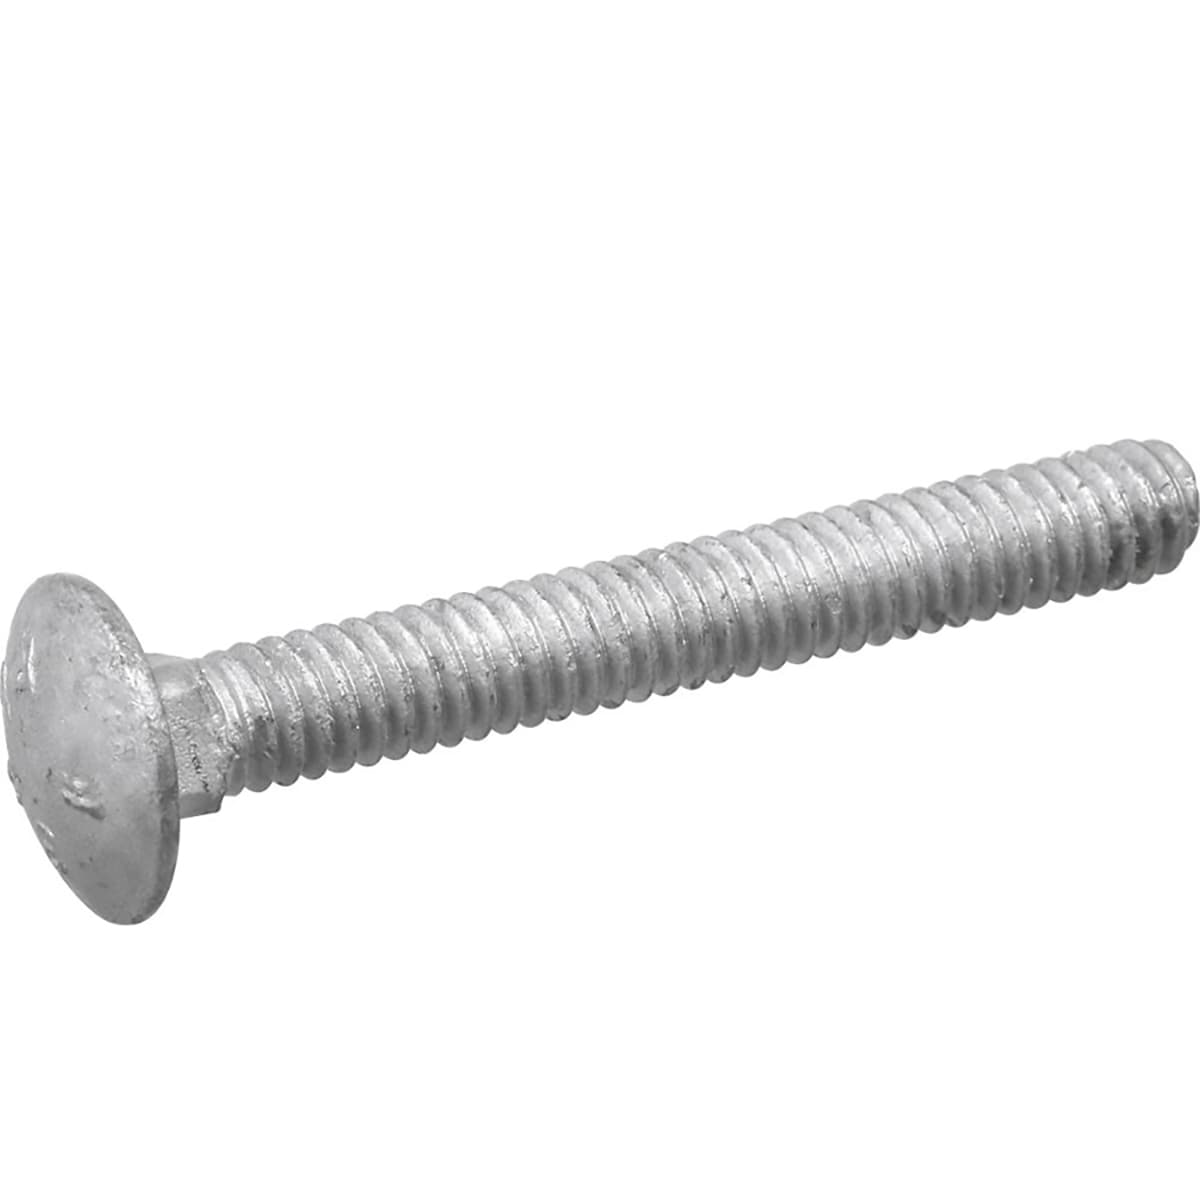 38 2 in 1 Nut and Bolt Thread Checker Bolt Size and Thread